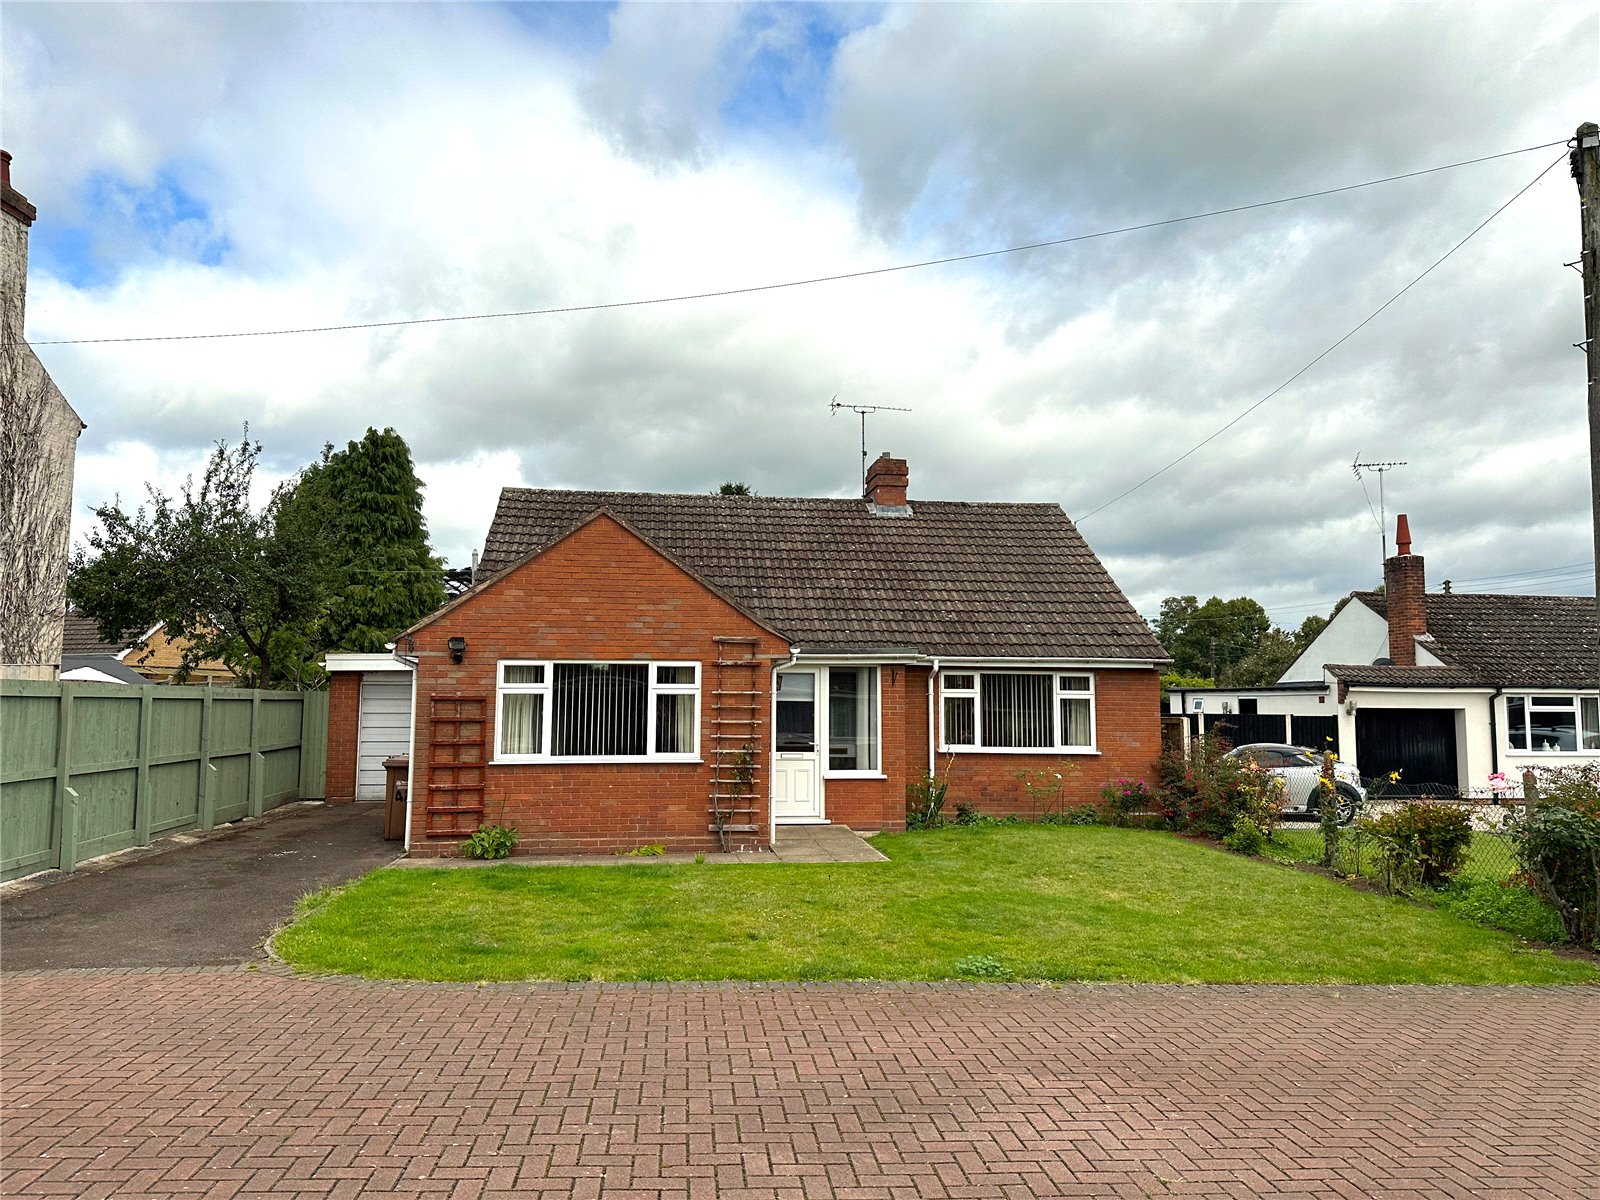 Tynings Close, Kidderminster, Worcestershire, DY11